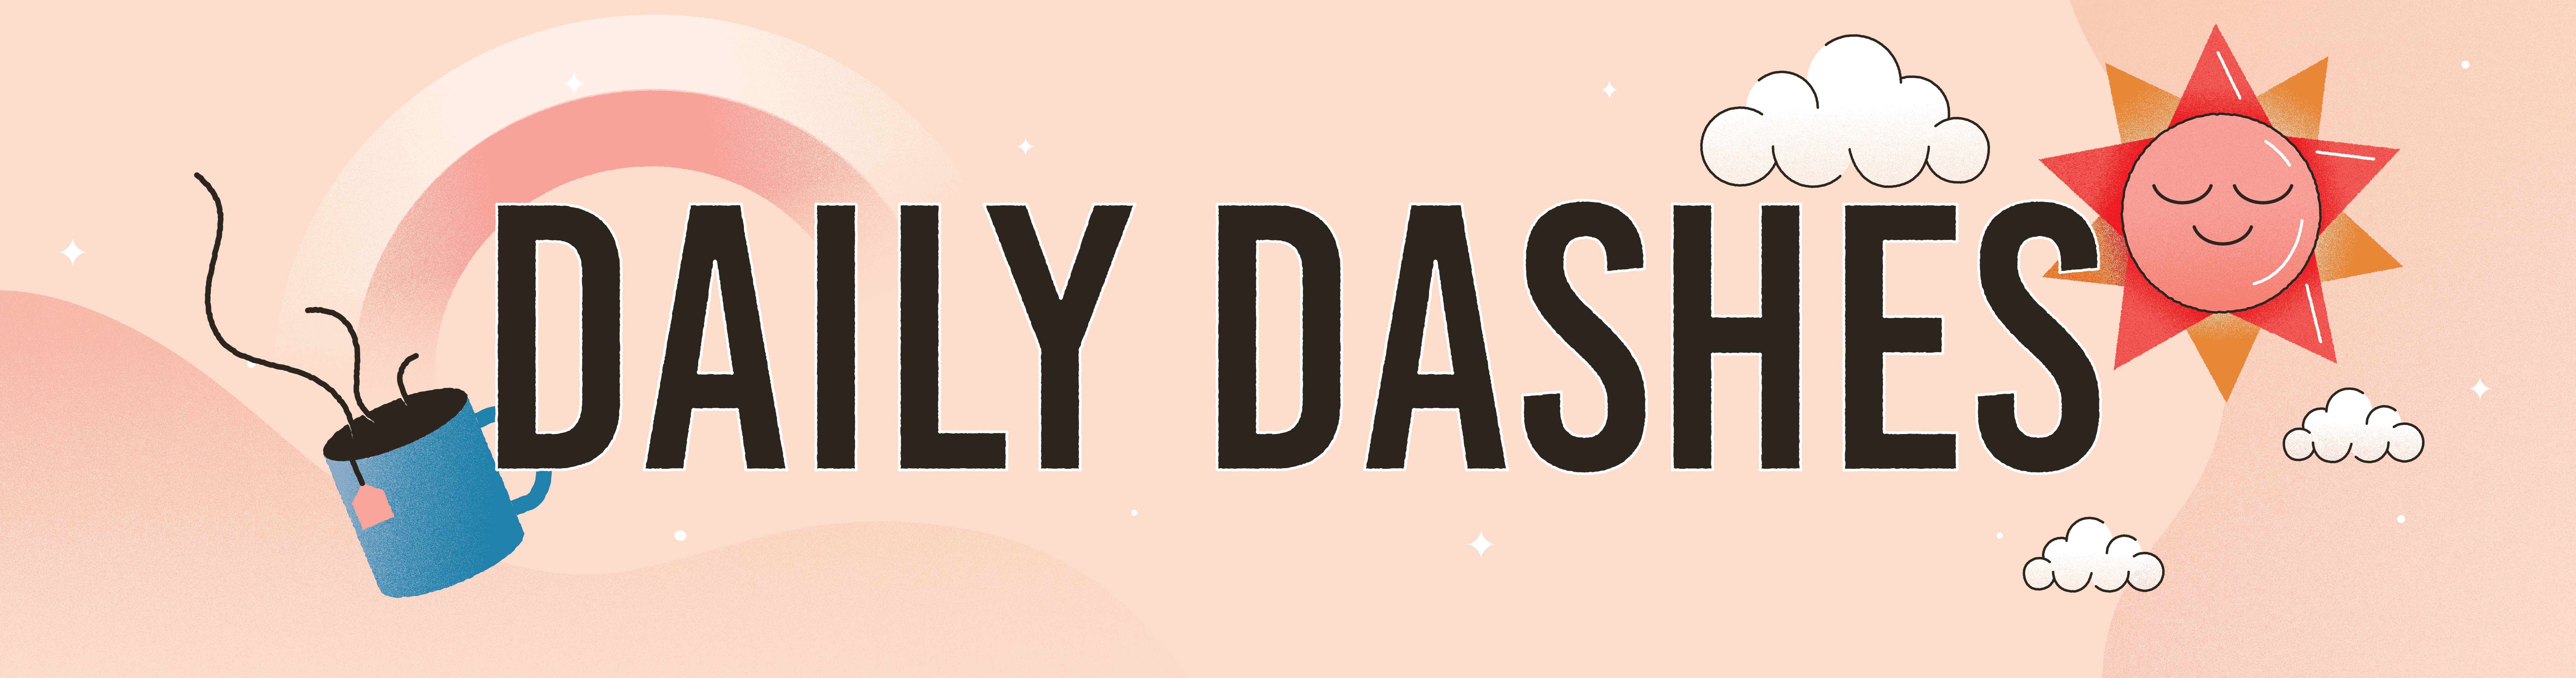 daily dashes banner.png